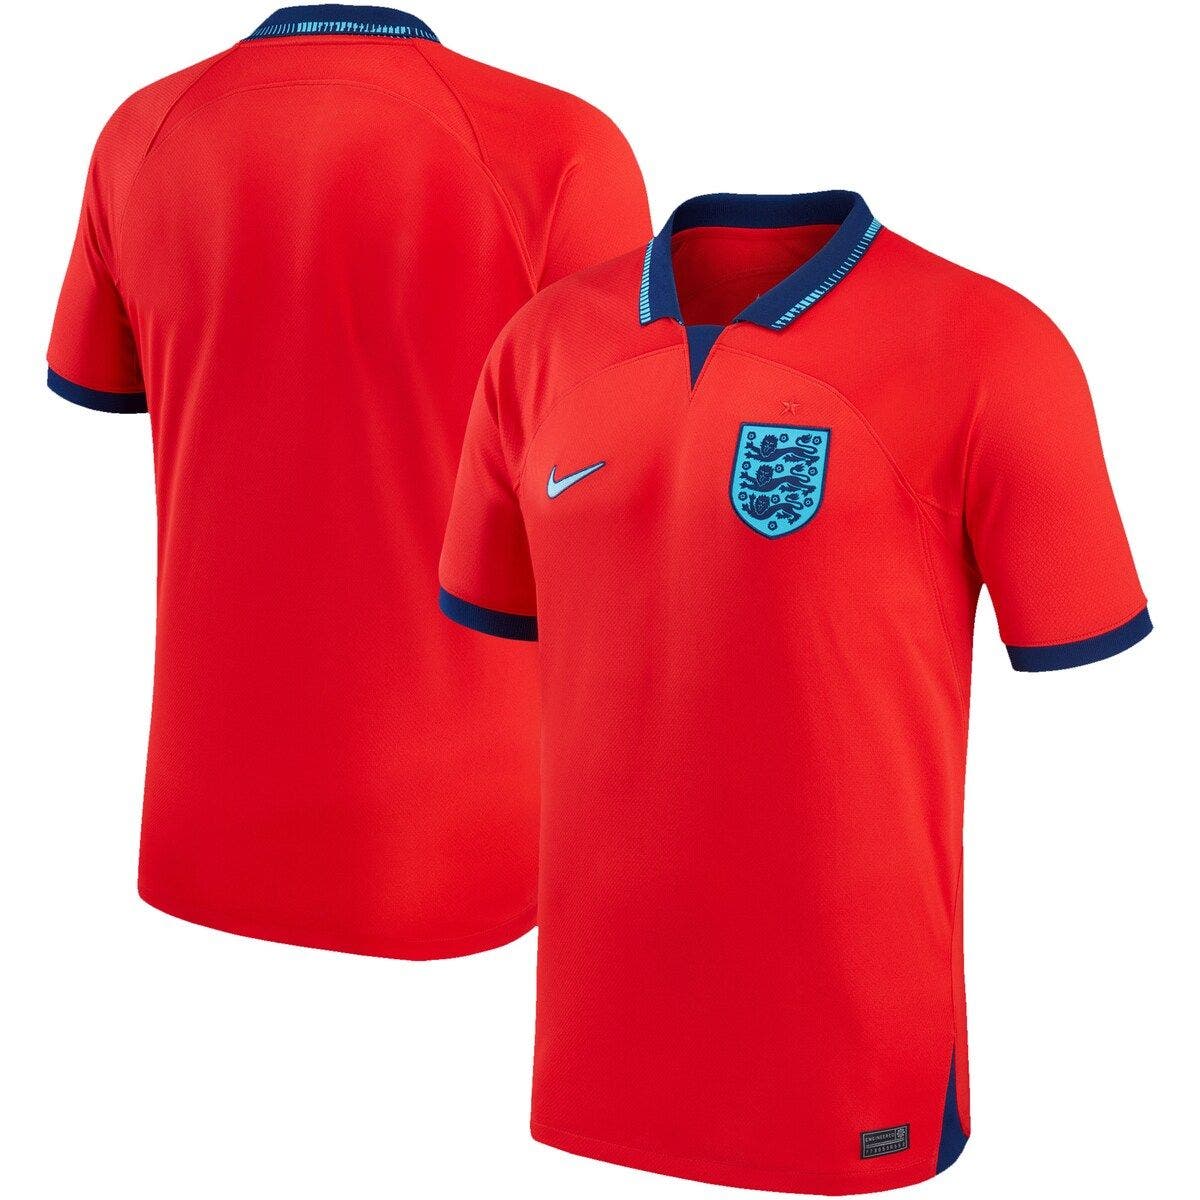 england youth jersey